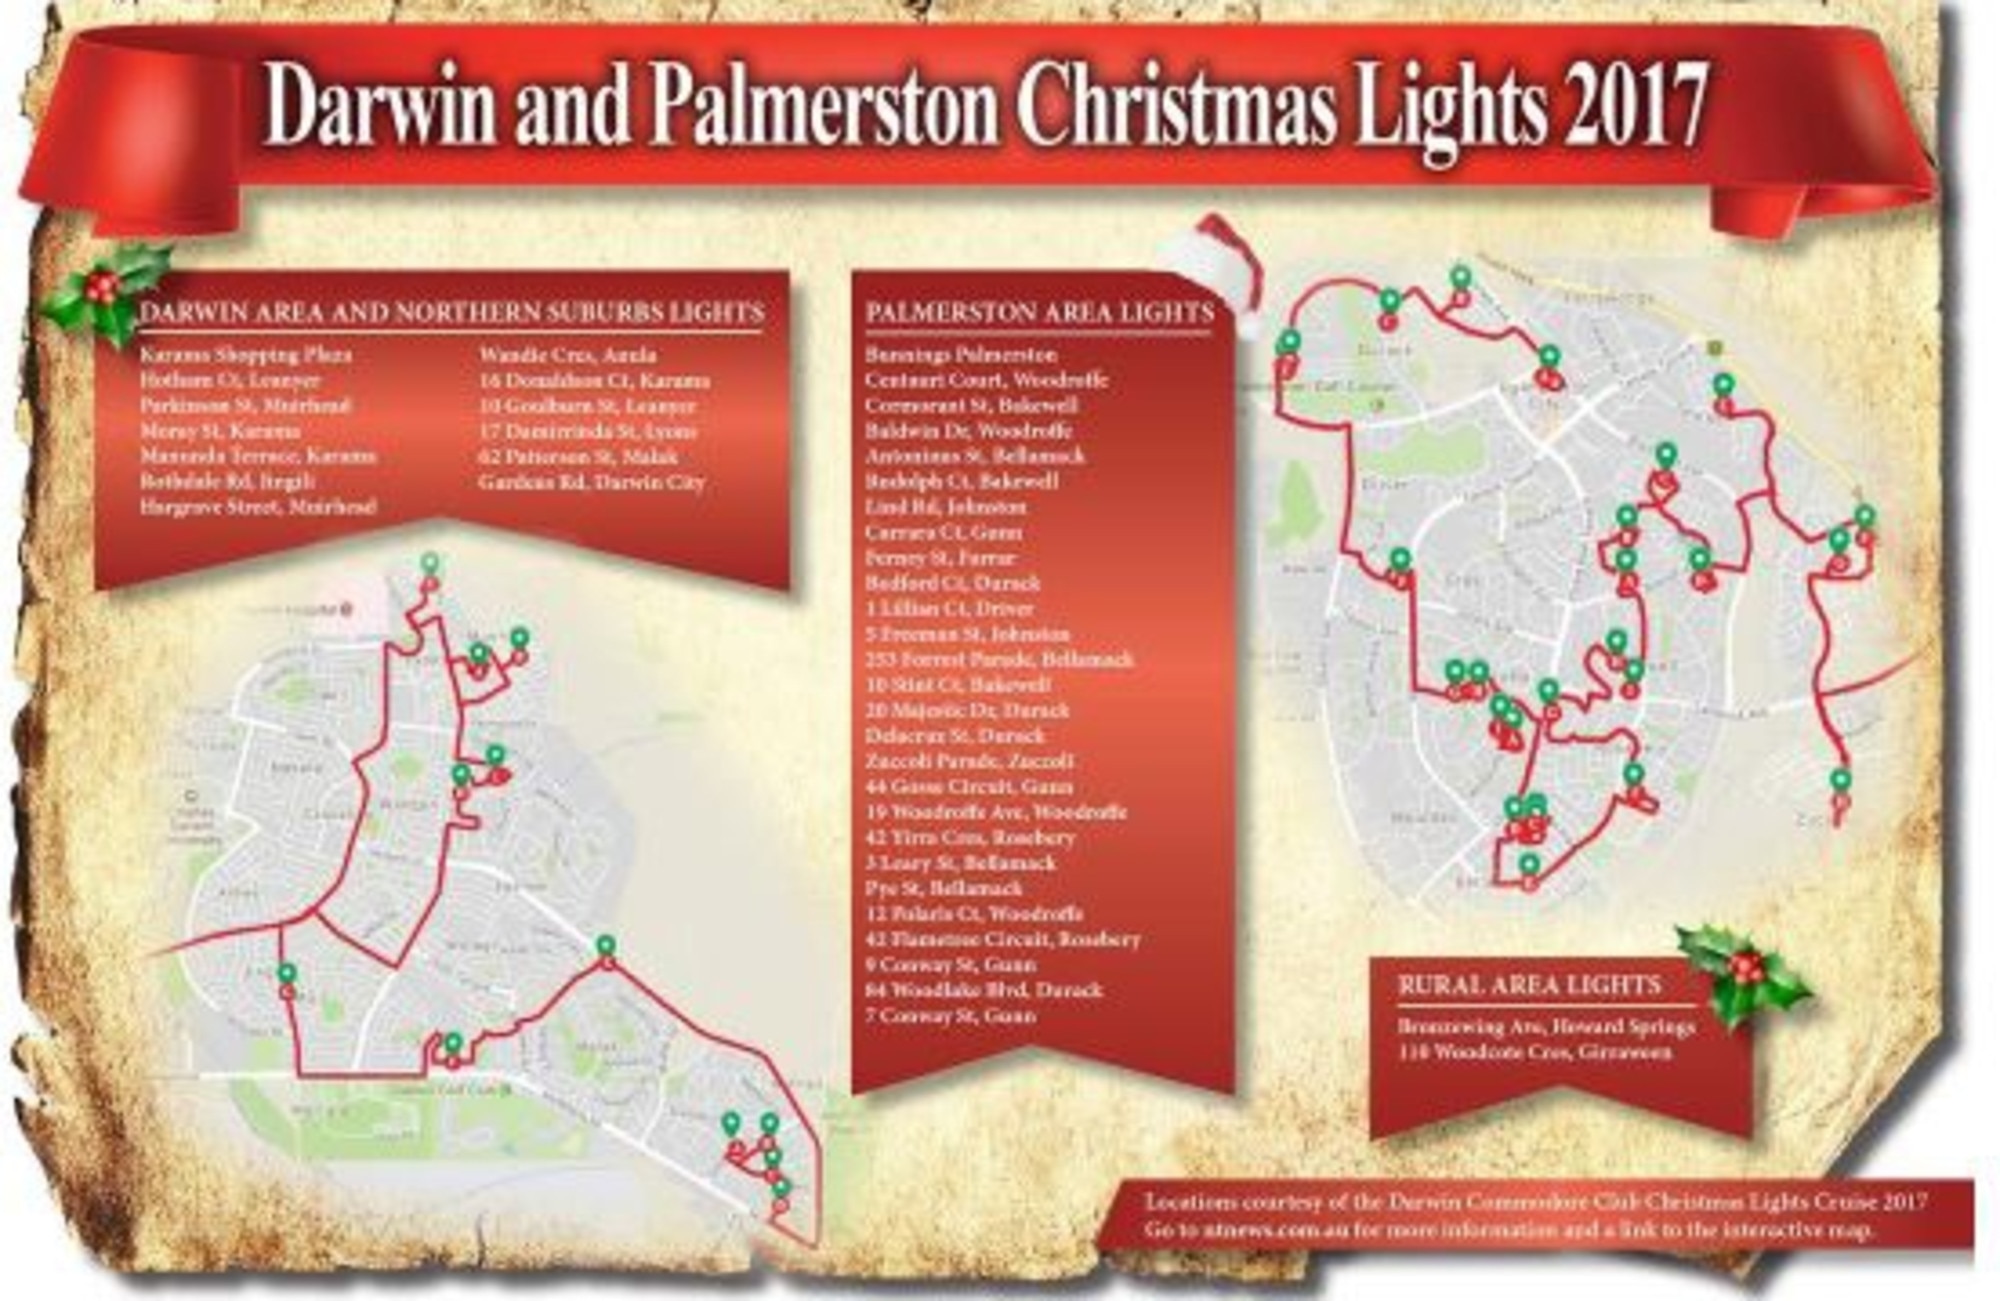 Darwin and Palmerston Christmas lights interactive map and full list